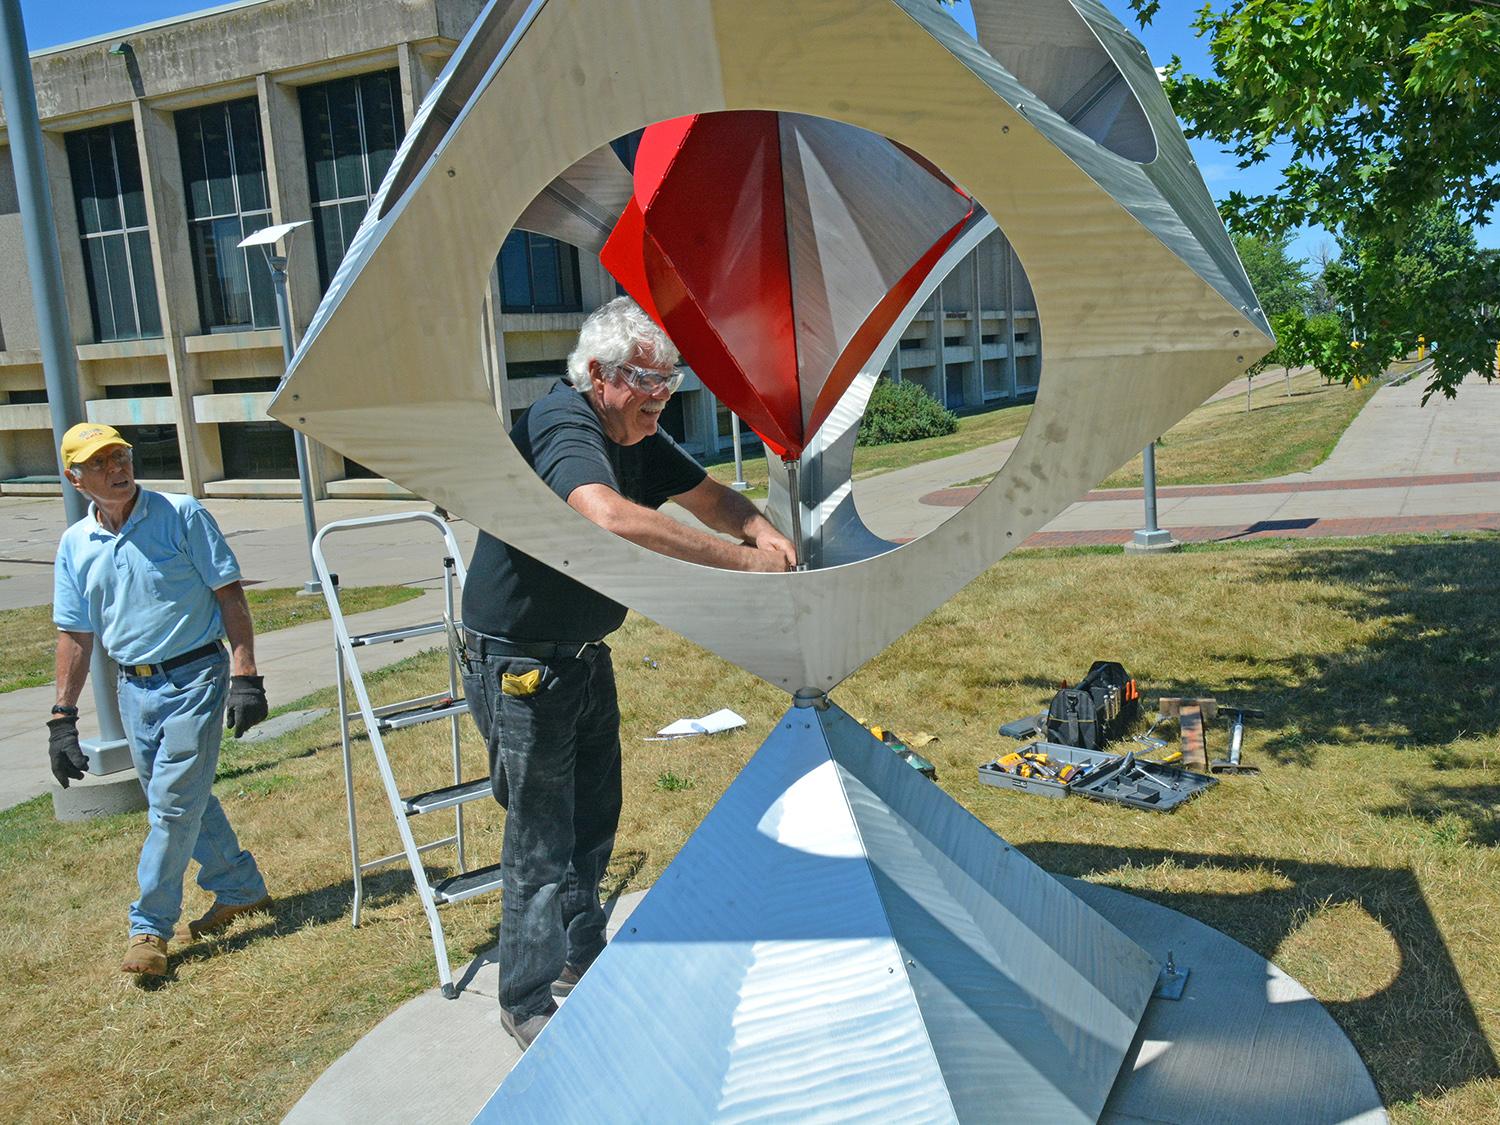 Artist Bob Turan with his sculpture that features a pinwheel in a box upon a pyramid